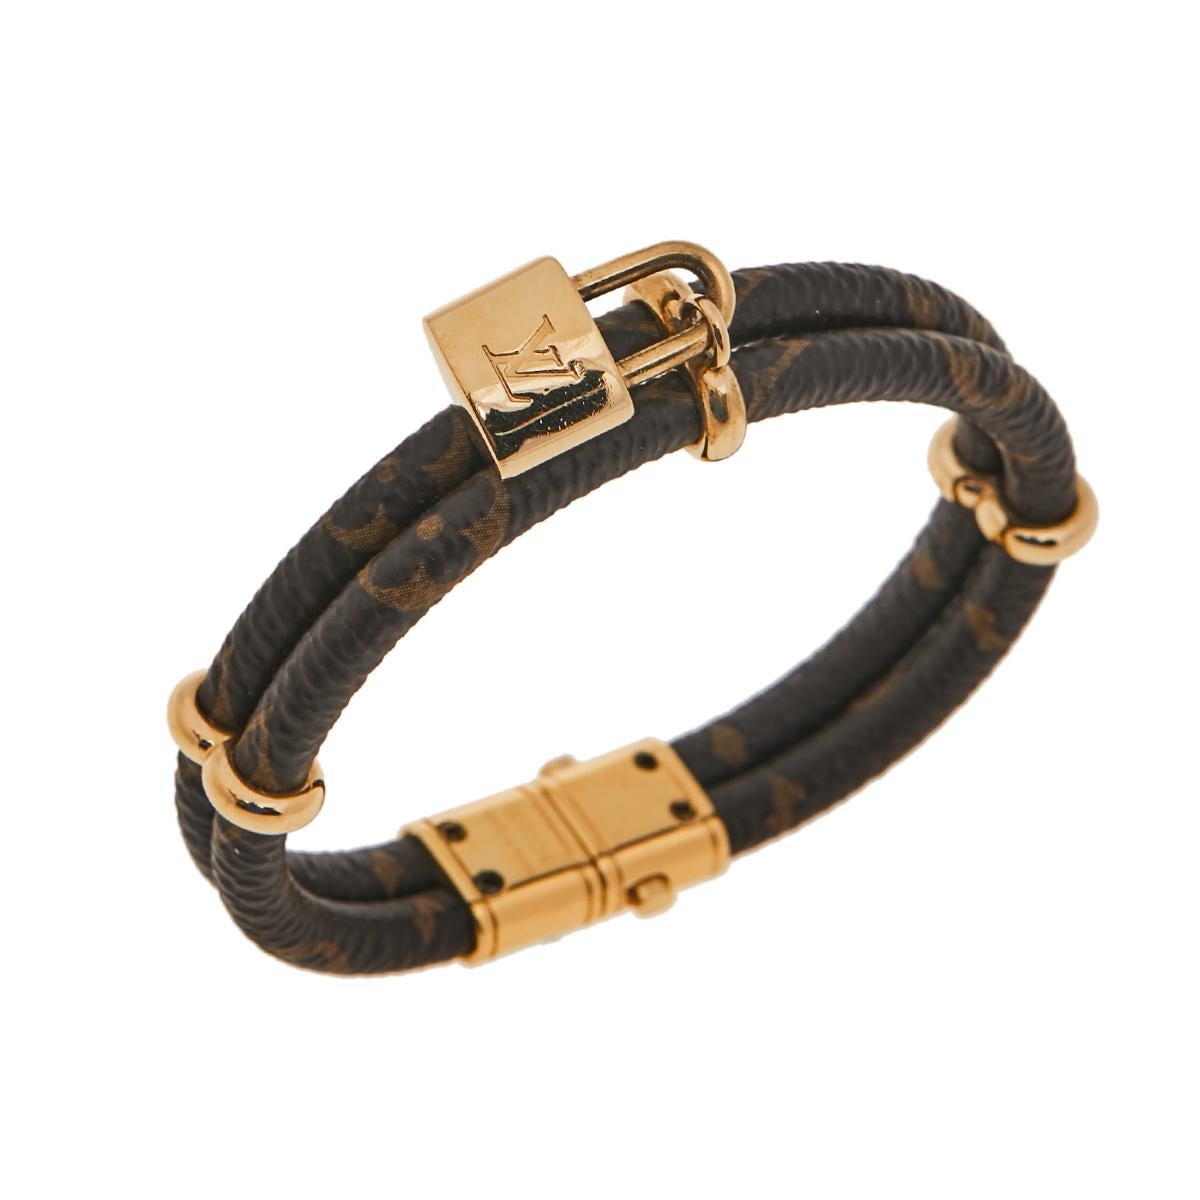 This Keep It Twice bracelet by Louis Vuitton adds a touch of luxurious charm to any ensemble. It features a gold-tone padlock inspired by vintage Louis Vuitton trunks. This lovely double bangle bracelet, crafted in monogram coated canvas, is very